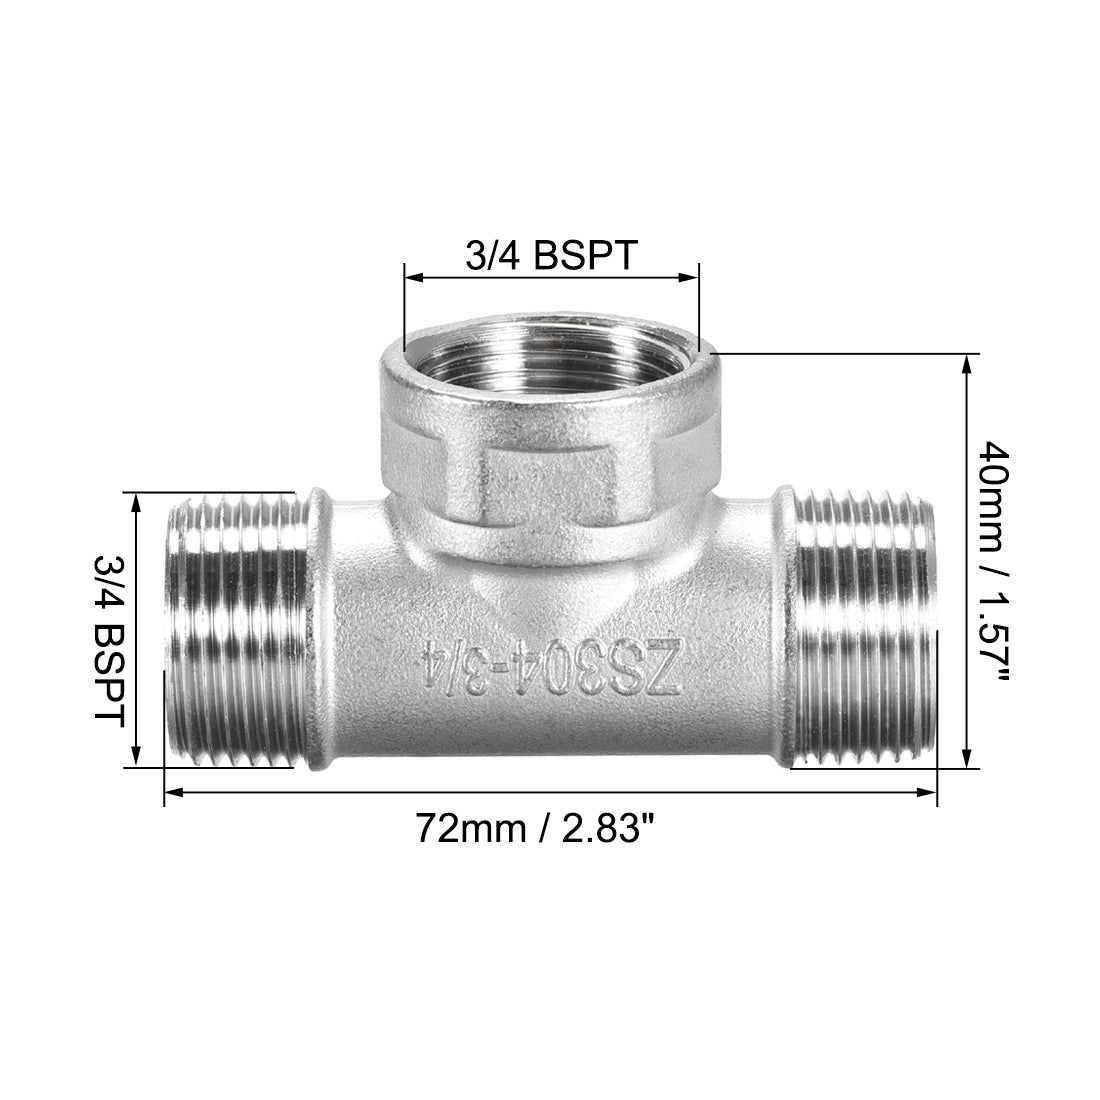 uxcell Uxcell Stainless Steel 304 Cast  Pipe Fitting 3/4 BSPT Male x 3/4 BSPT Female x 3/4 BSPT Male Tee Shaped Connector Coupler